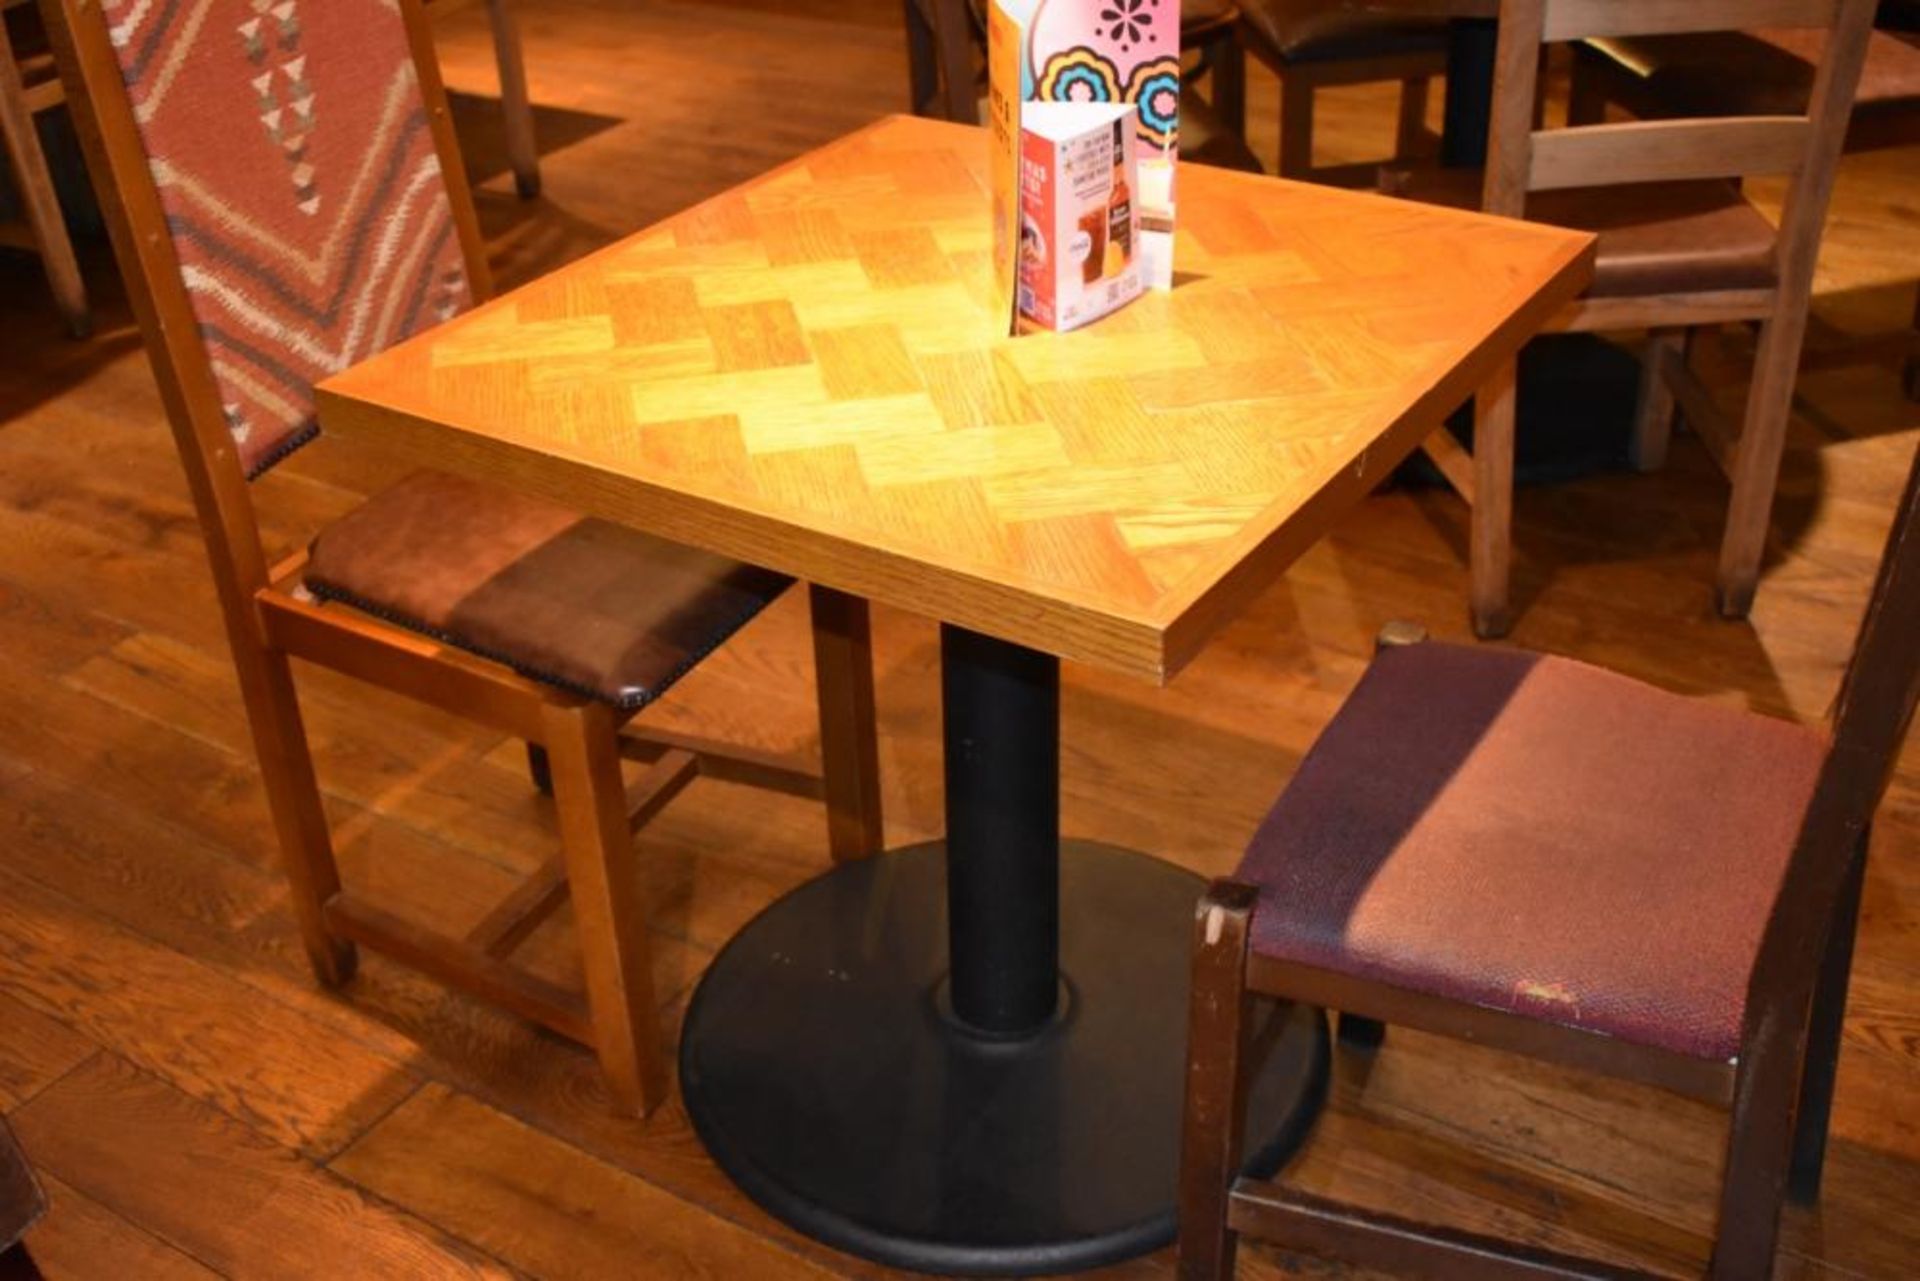 5 x Parquet Design Restaurant Dining Tables With Cast Iron Bases - Small Size - CL461 - Location: Lo